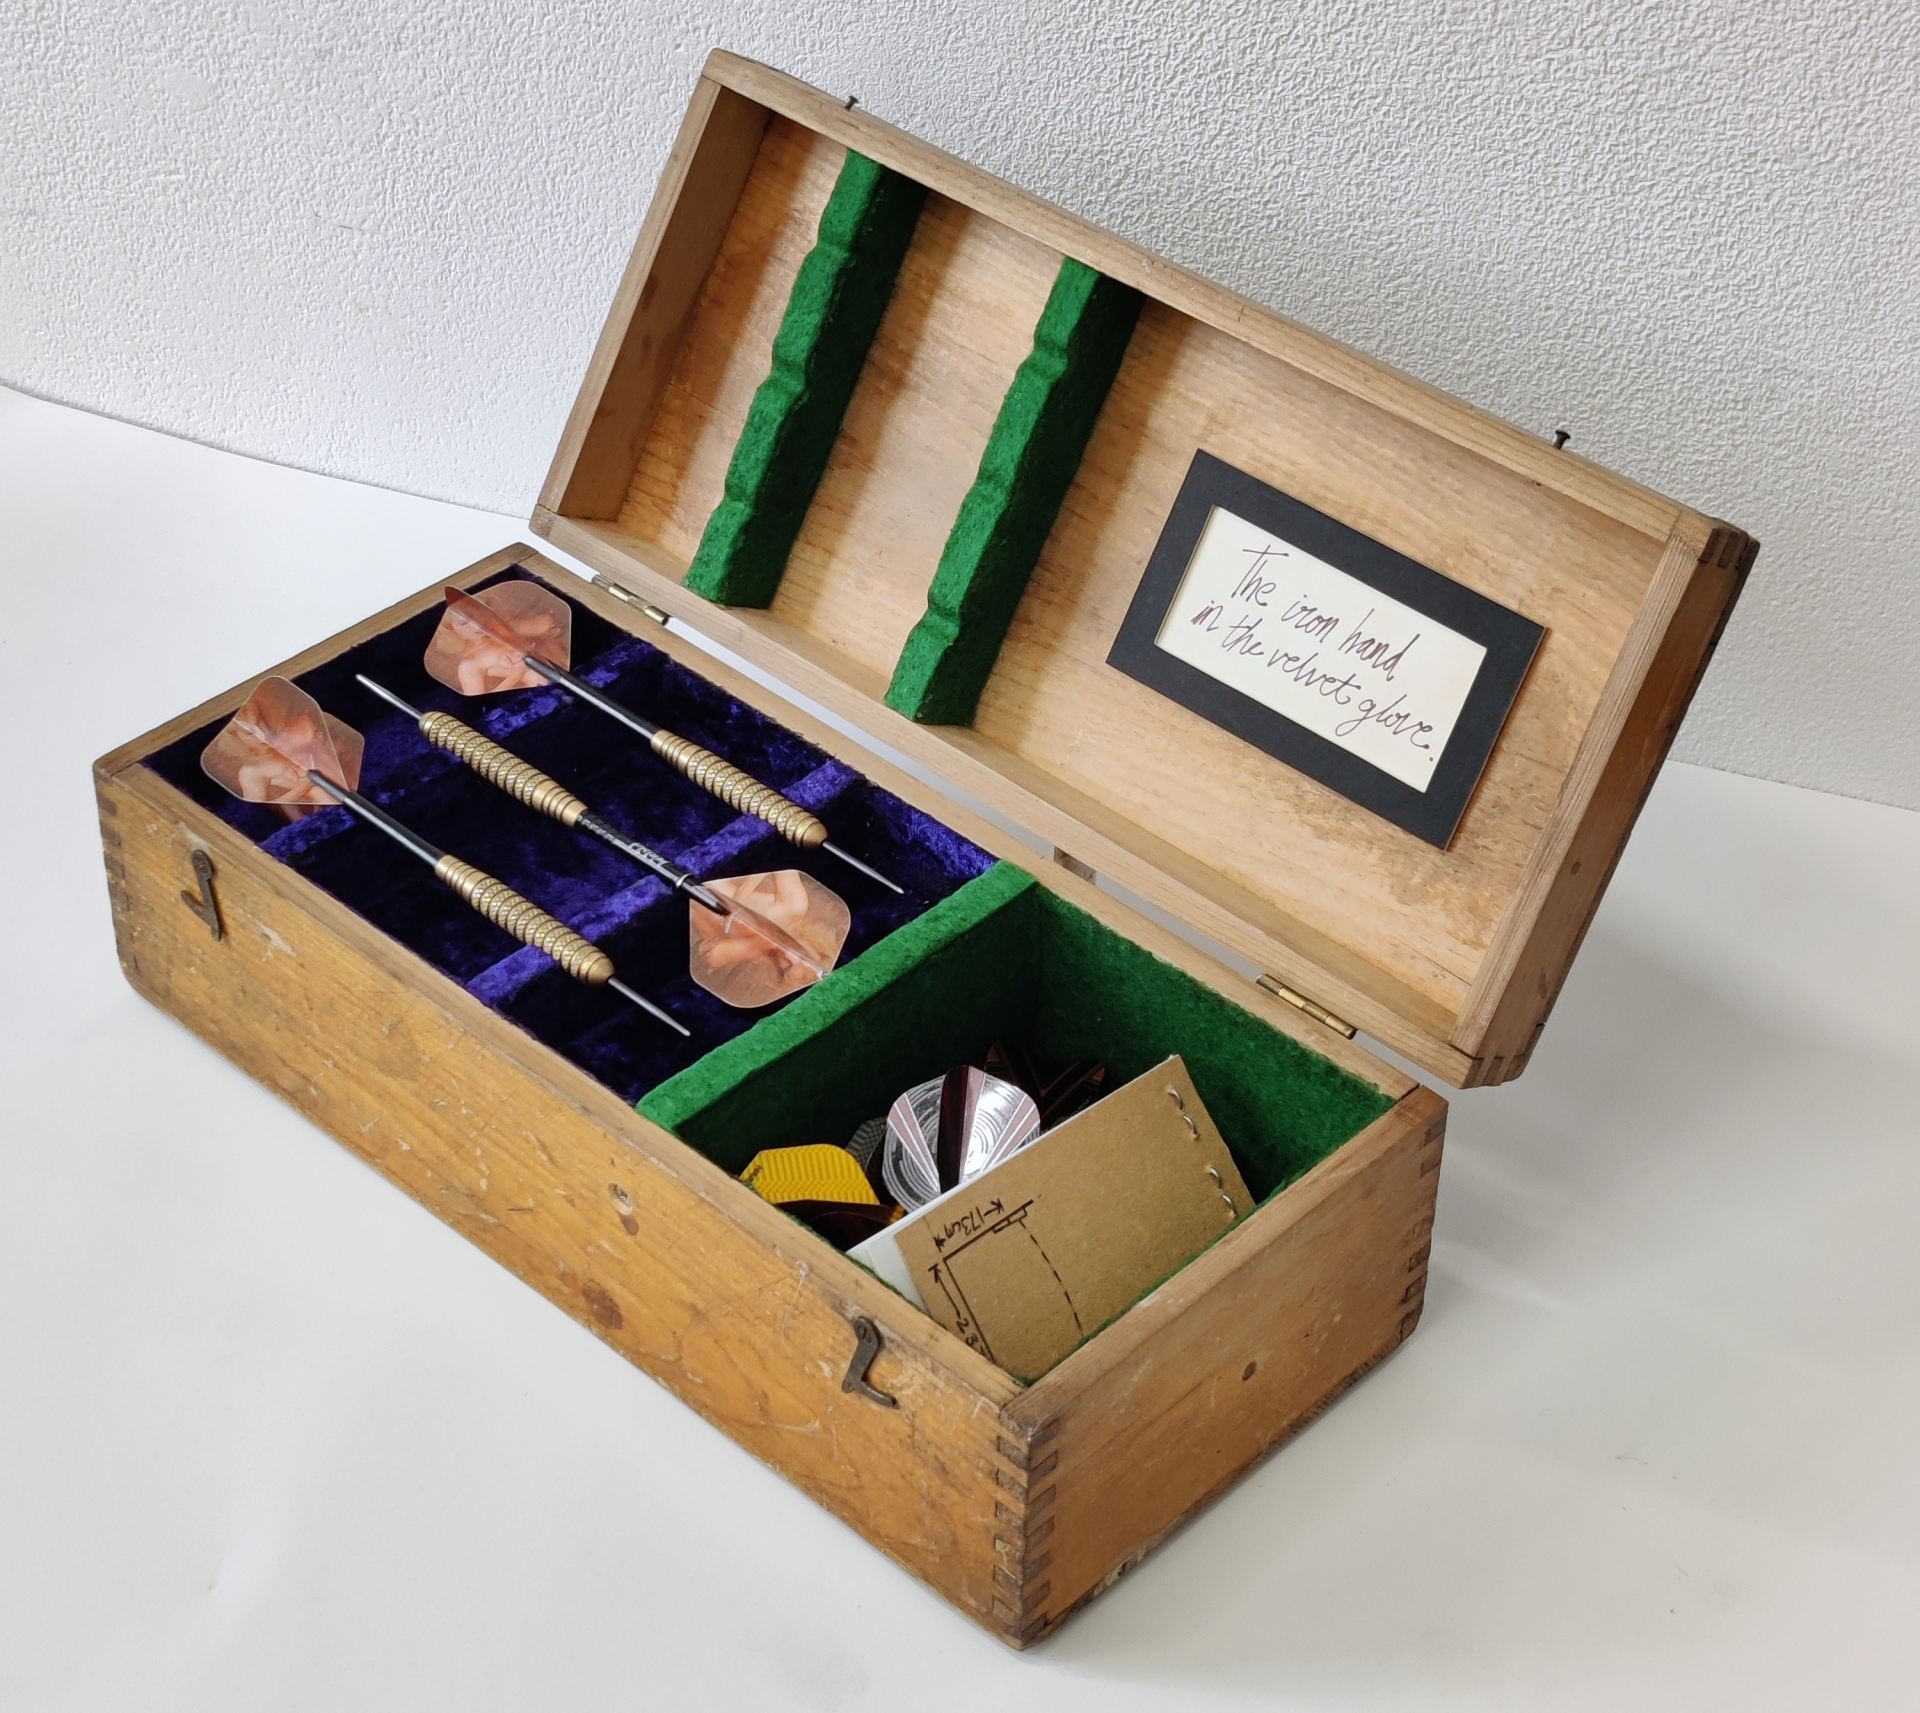 A handmade, velvet and felt lined, dart box. The box holds darts, flights, and notebook, and includes the quote “The iron hand in the velvet glove” on the inside of the hinged lid.